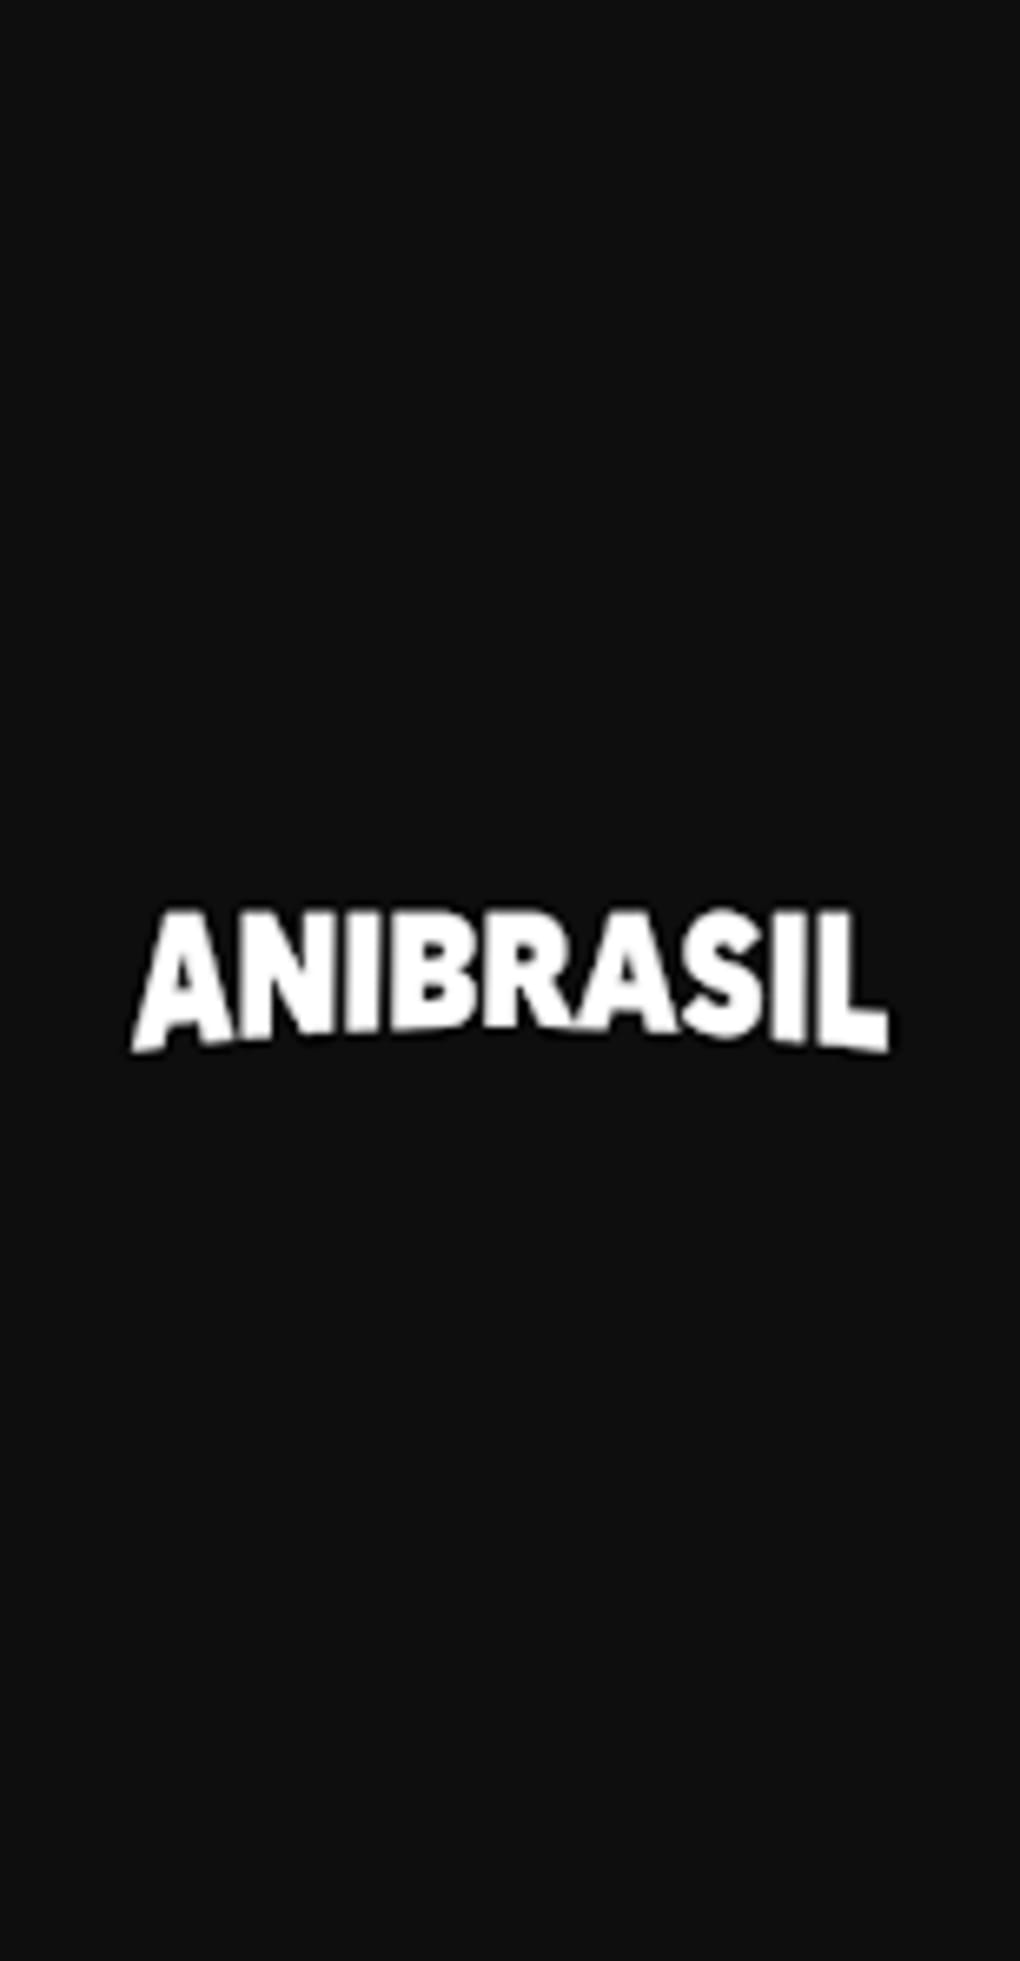 Animes Brasil - Full HD Animes APK (Android App) - Free Download